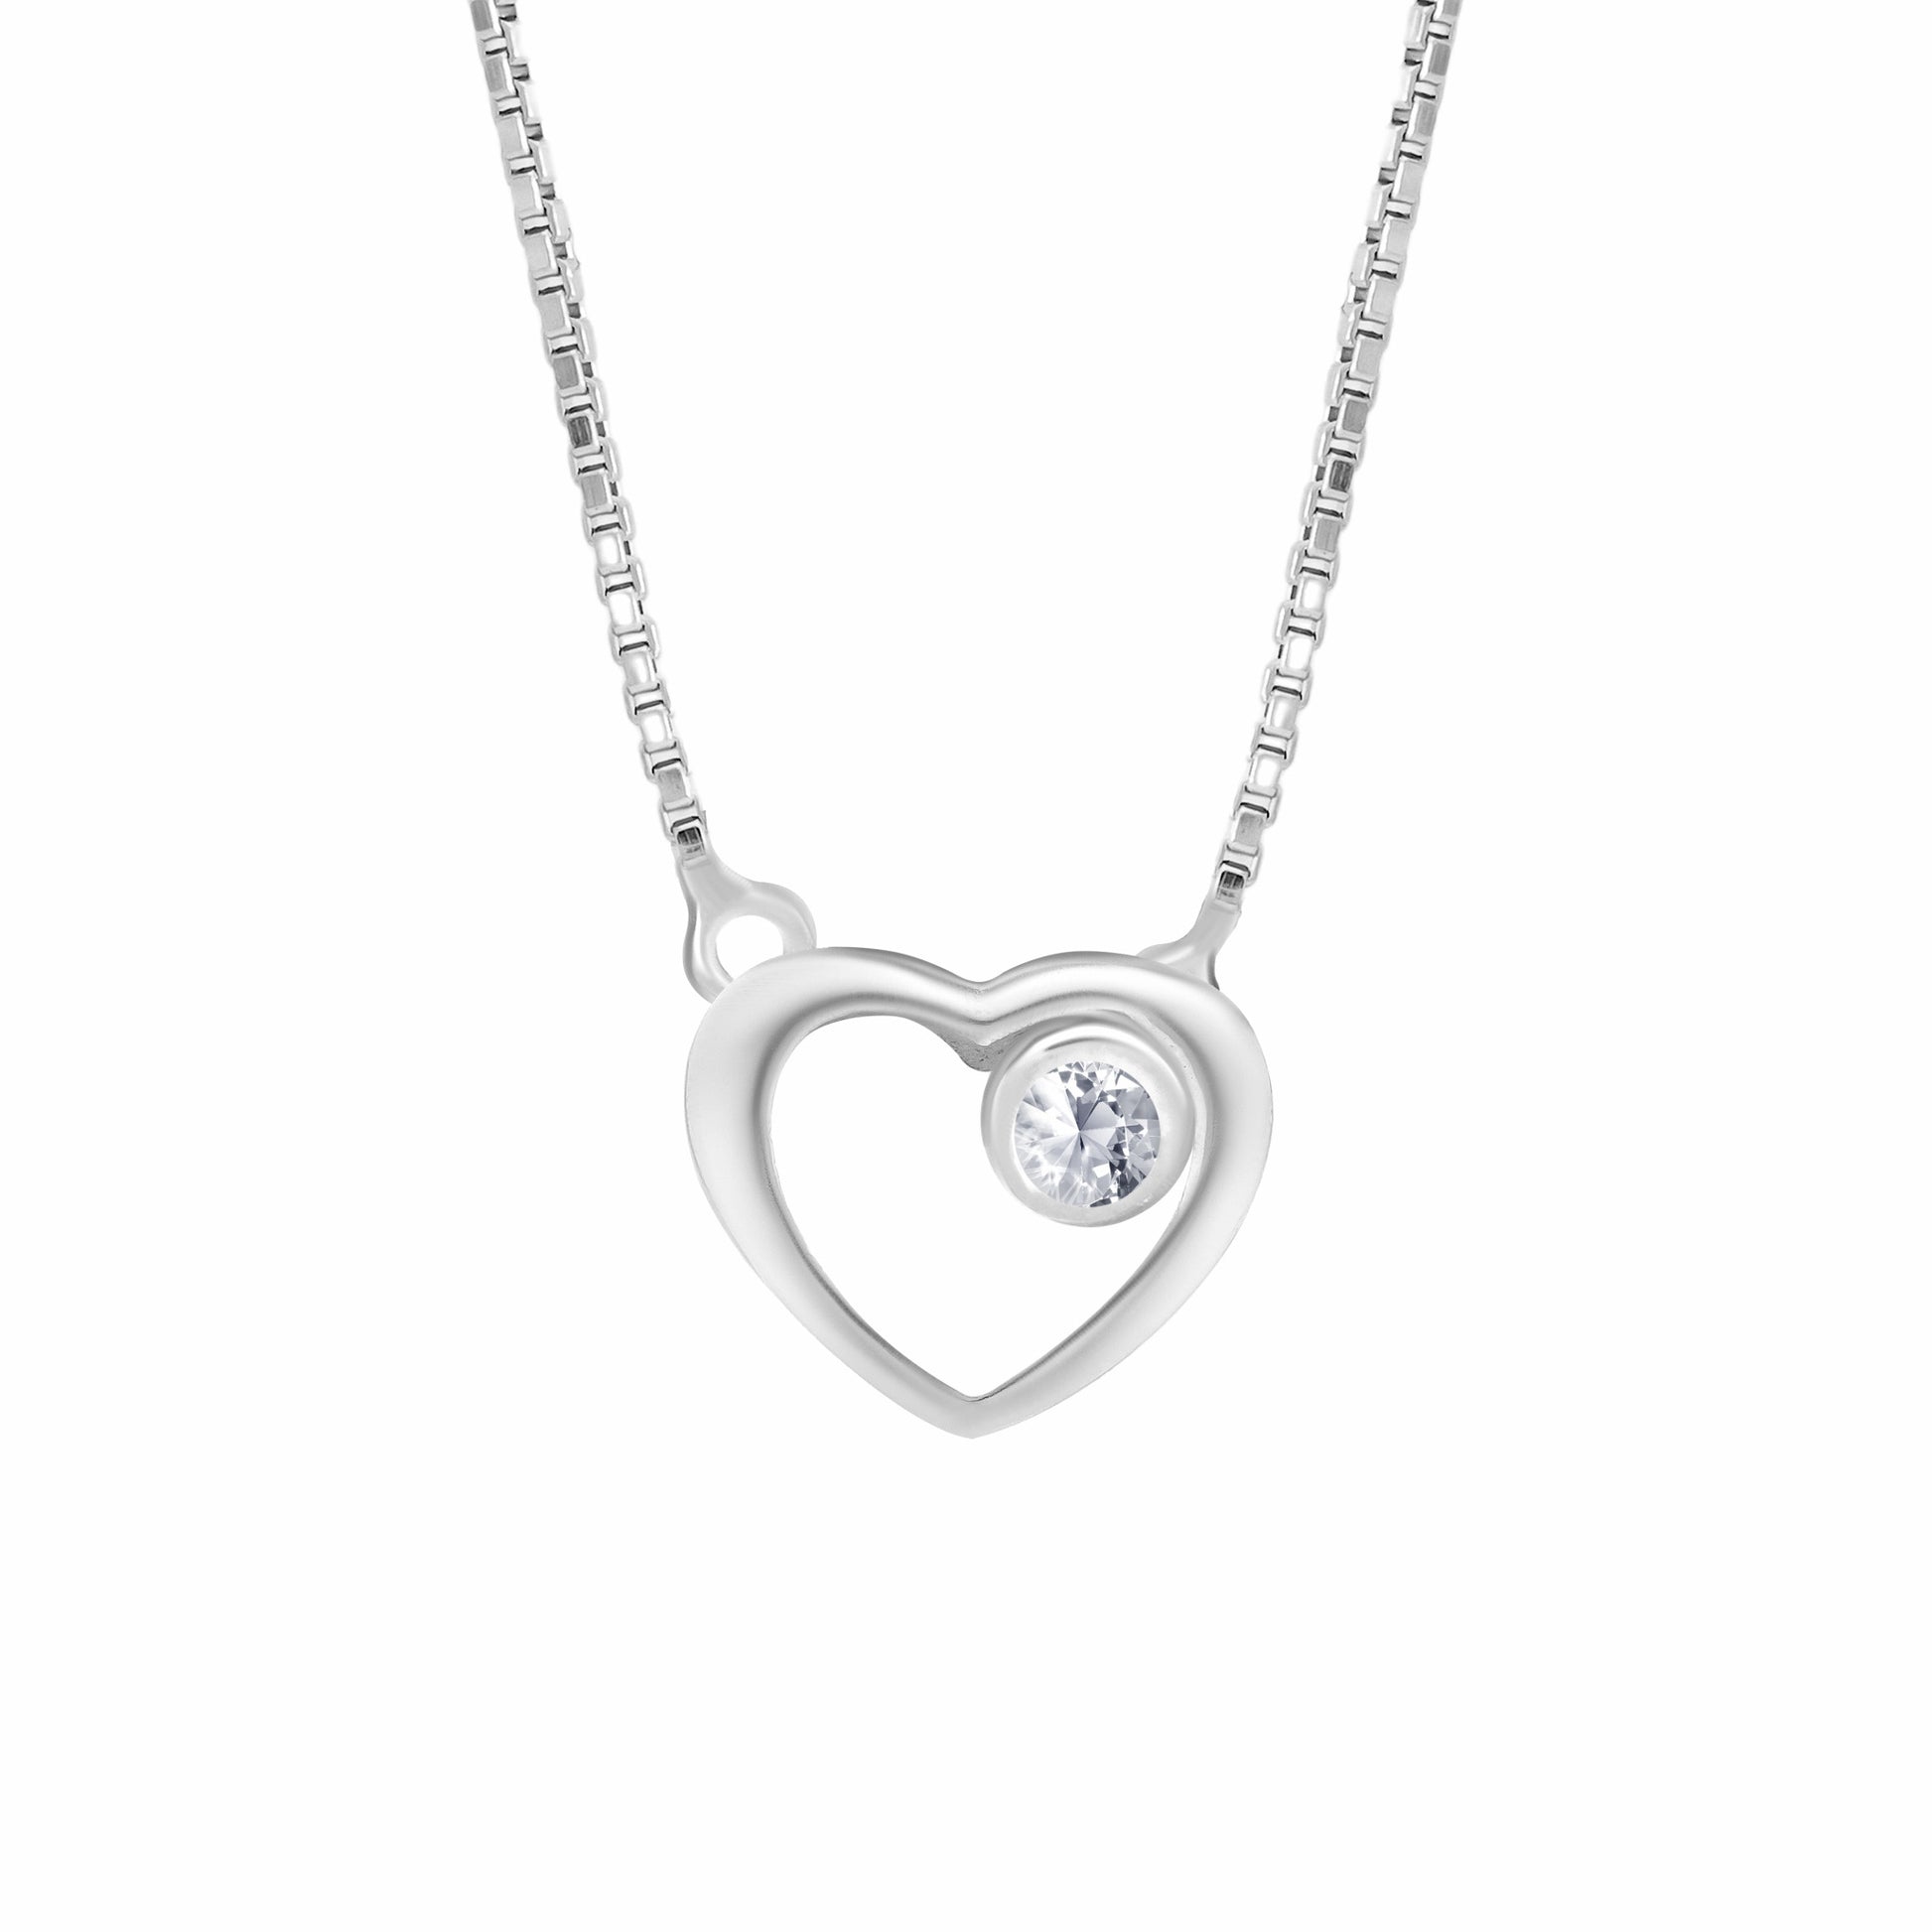 Heart Shape Silver Necklace on white background